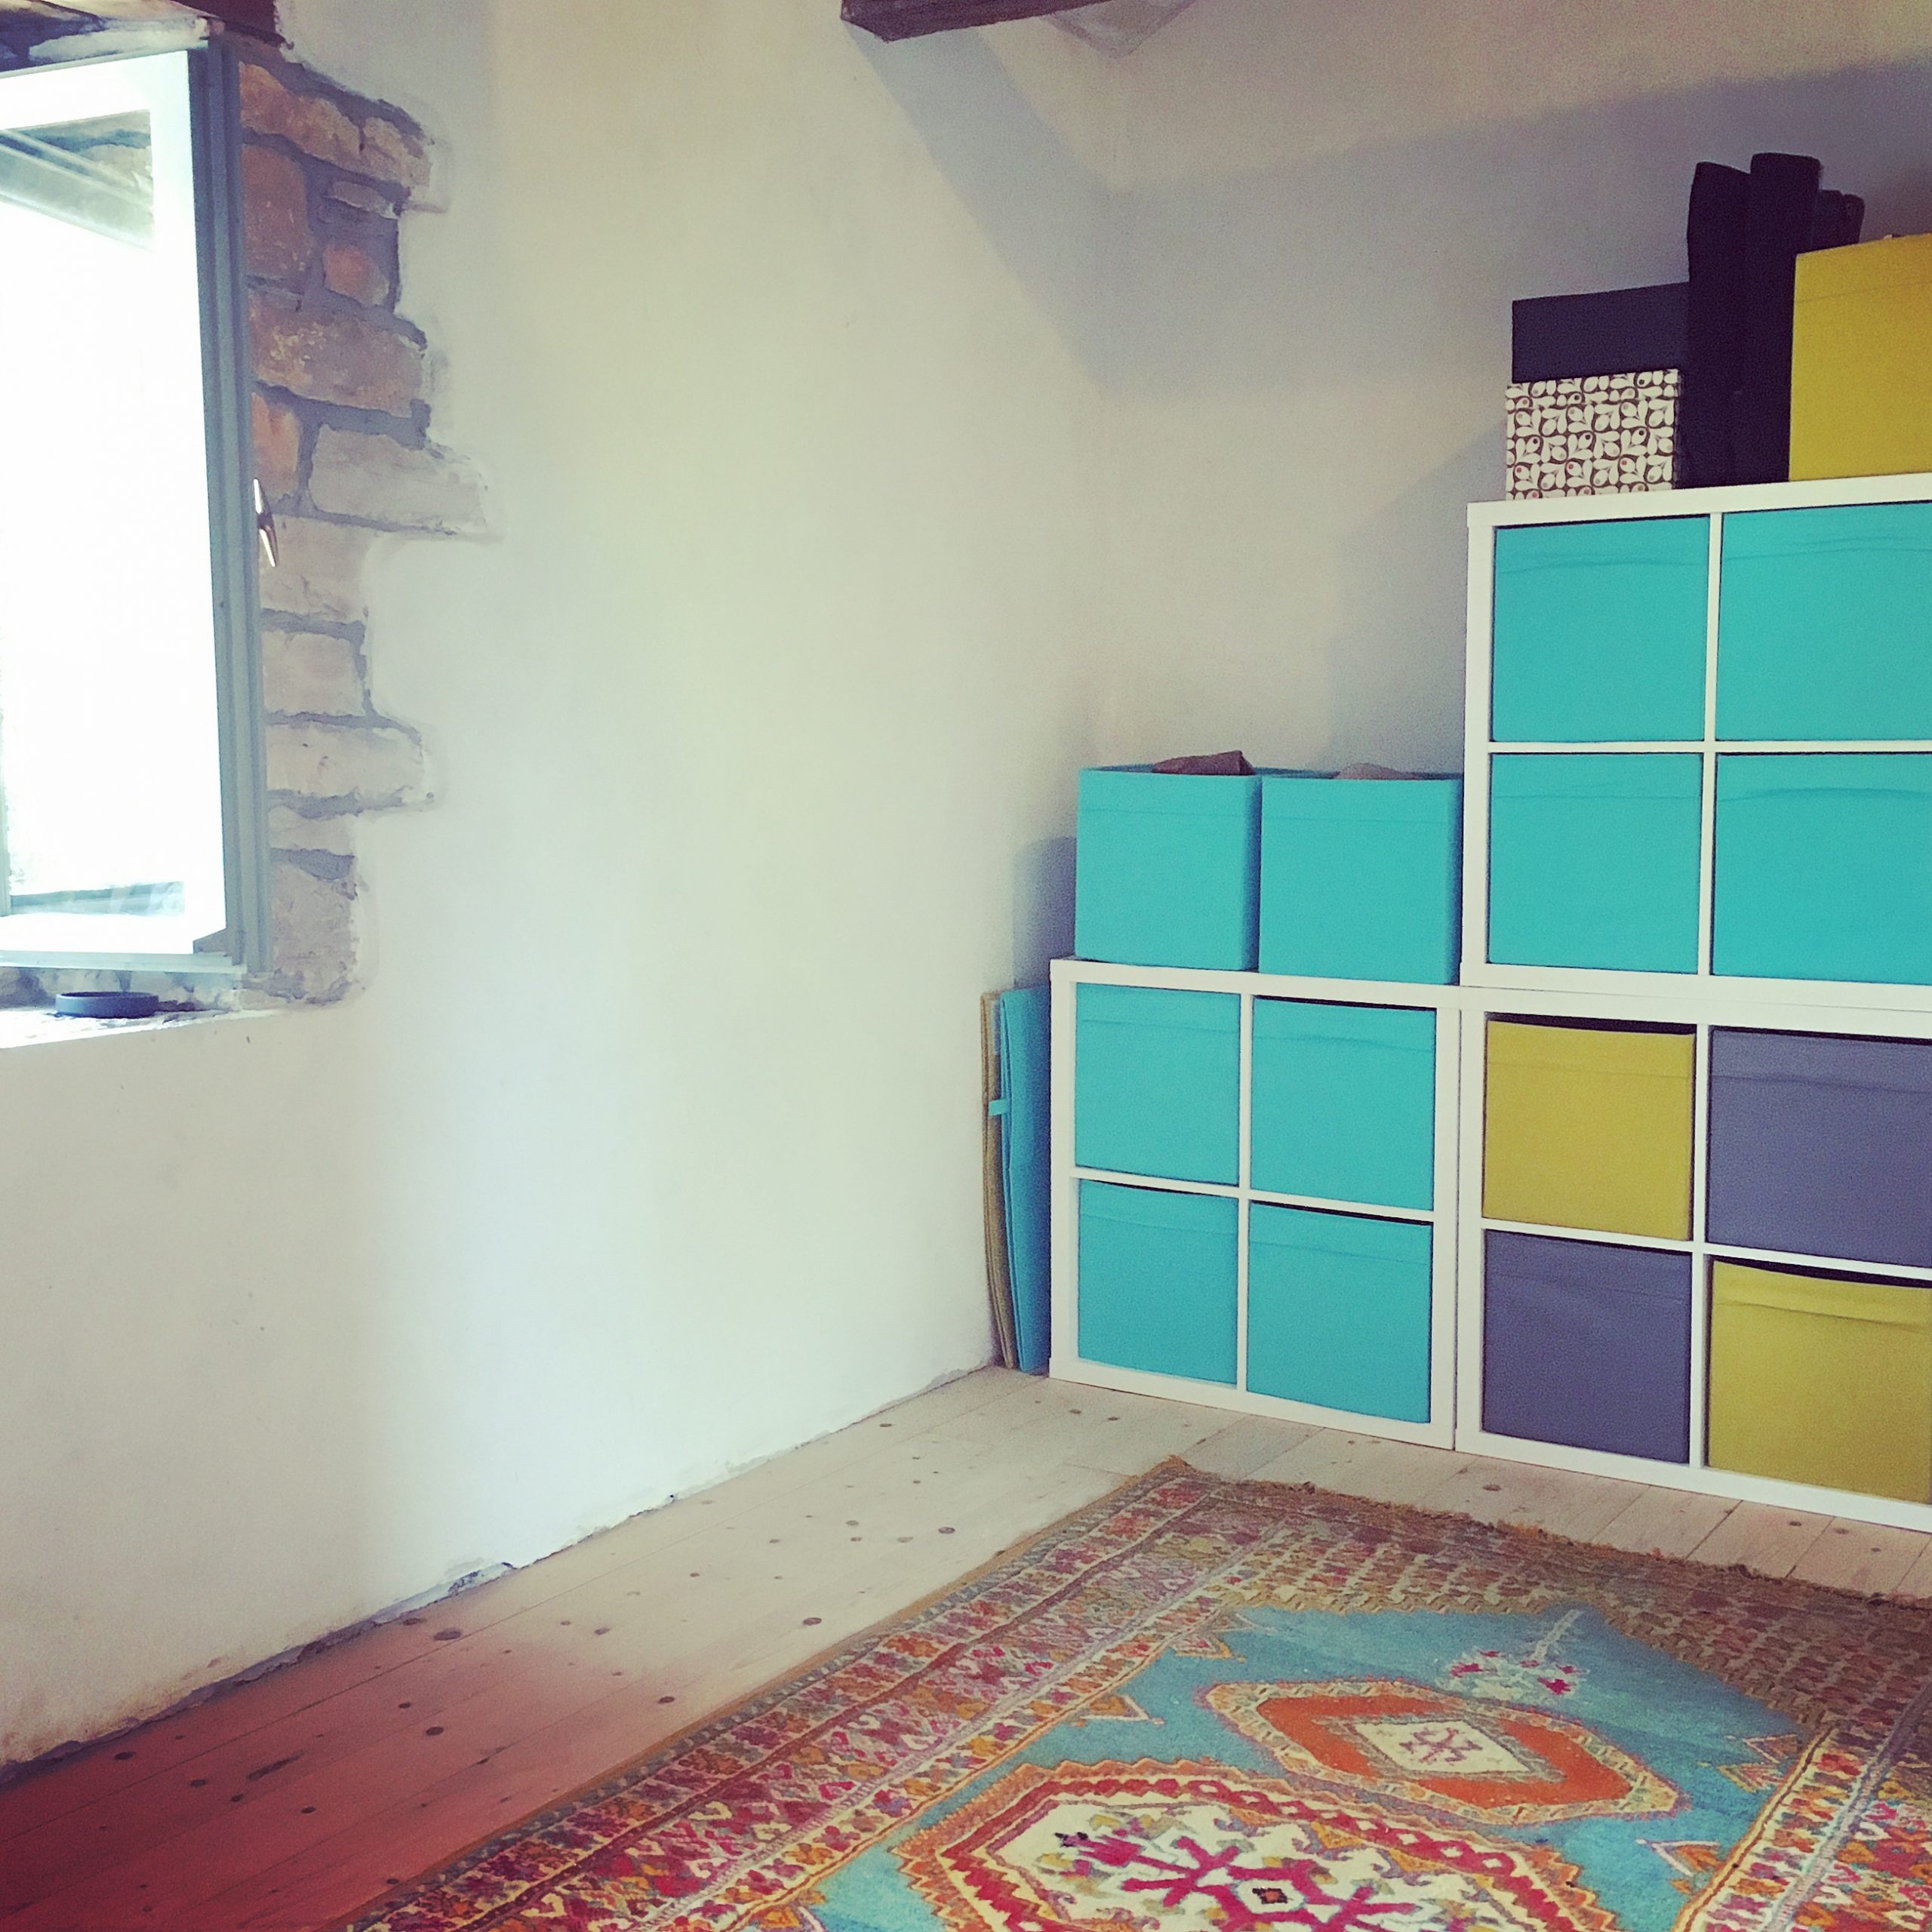 The first incarnation of the room – storage space…